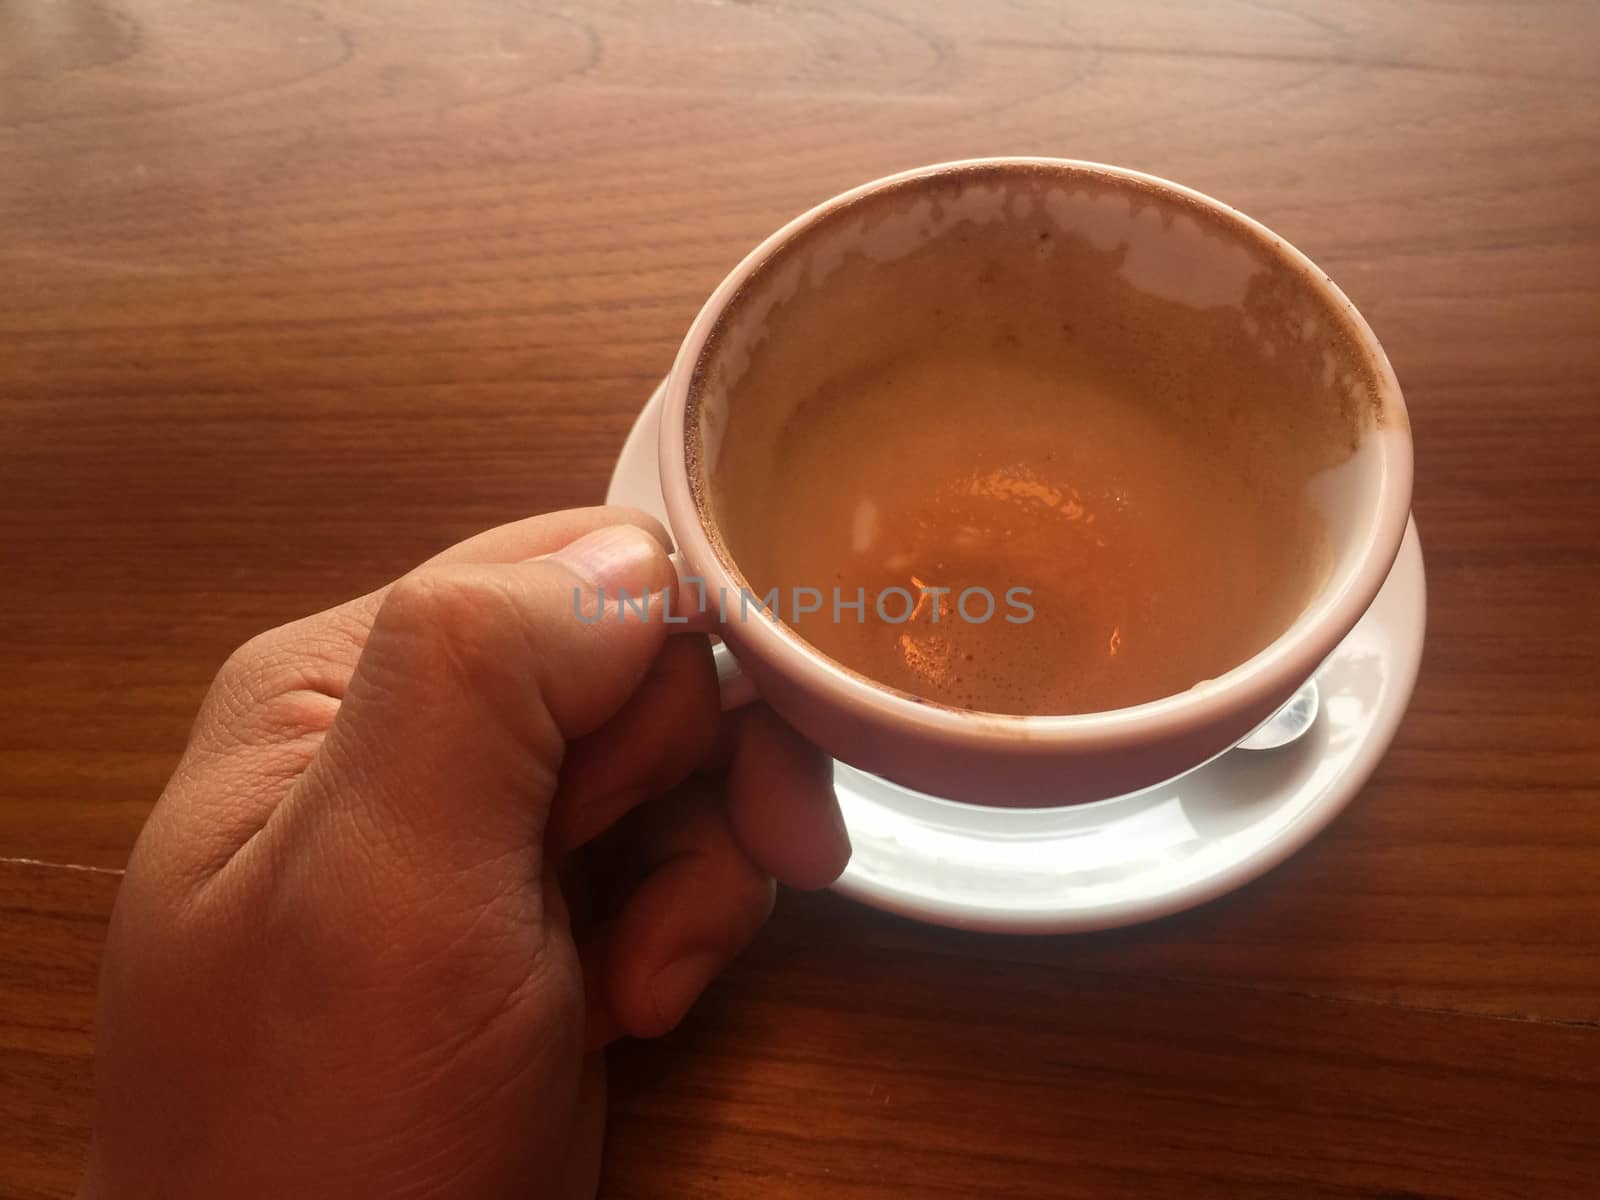 Male hands holding cups of coffee on wooden table background,No coffee